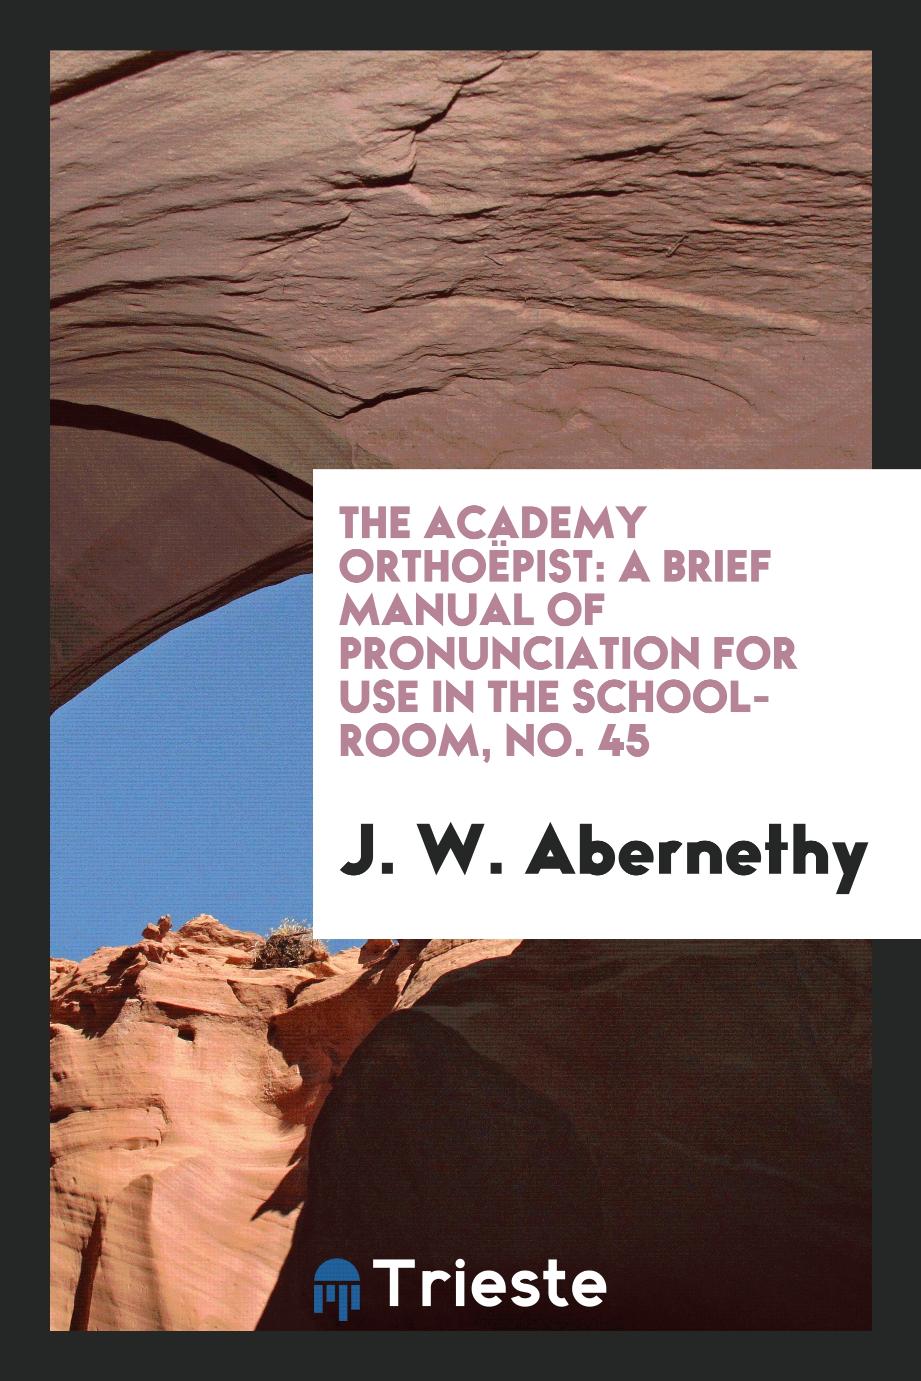 The Academy Orthoëpist: A Brief Manual of Pronunciation for Use in the School-room, No. 45